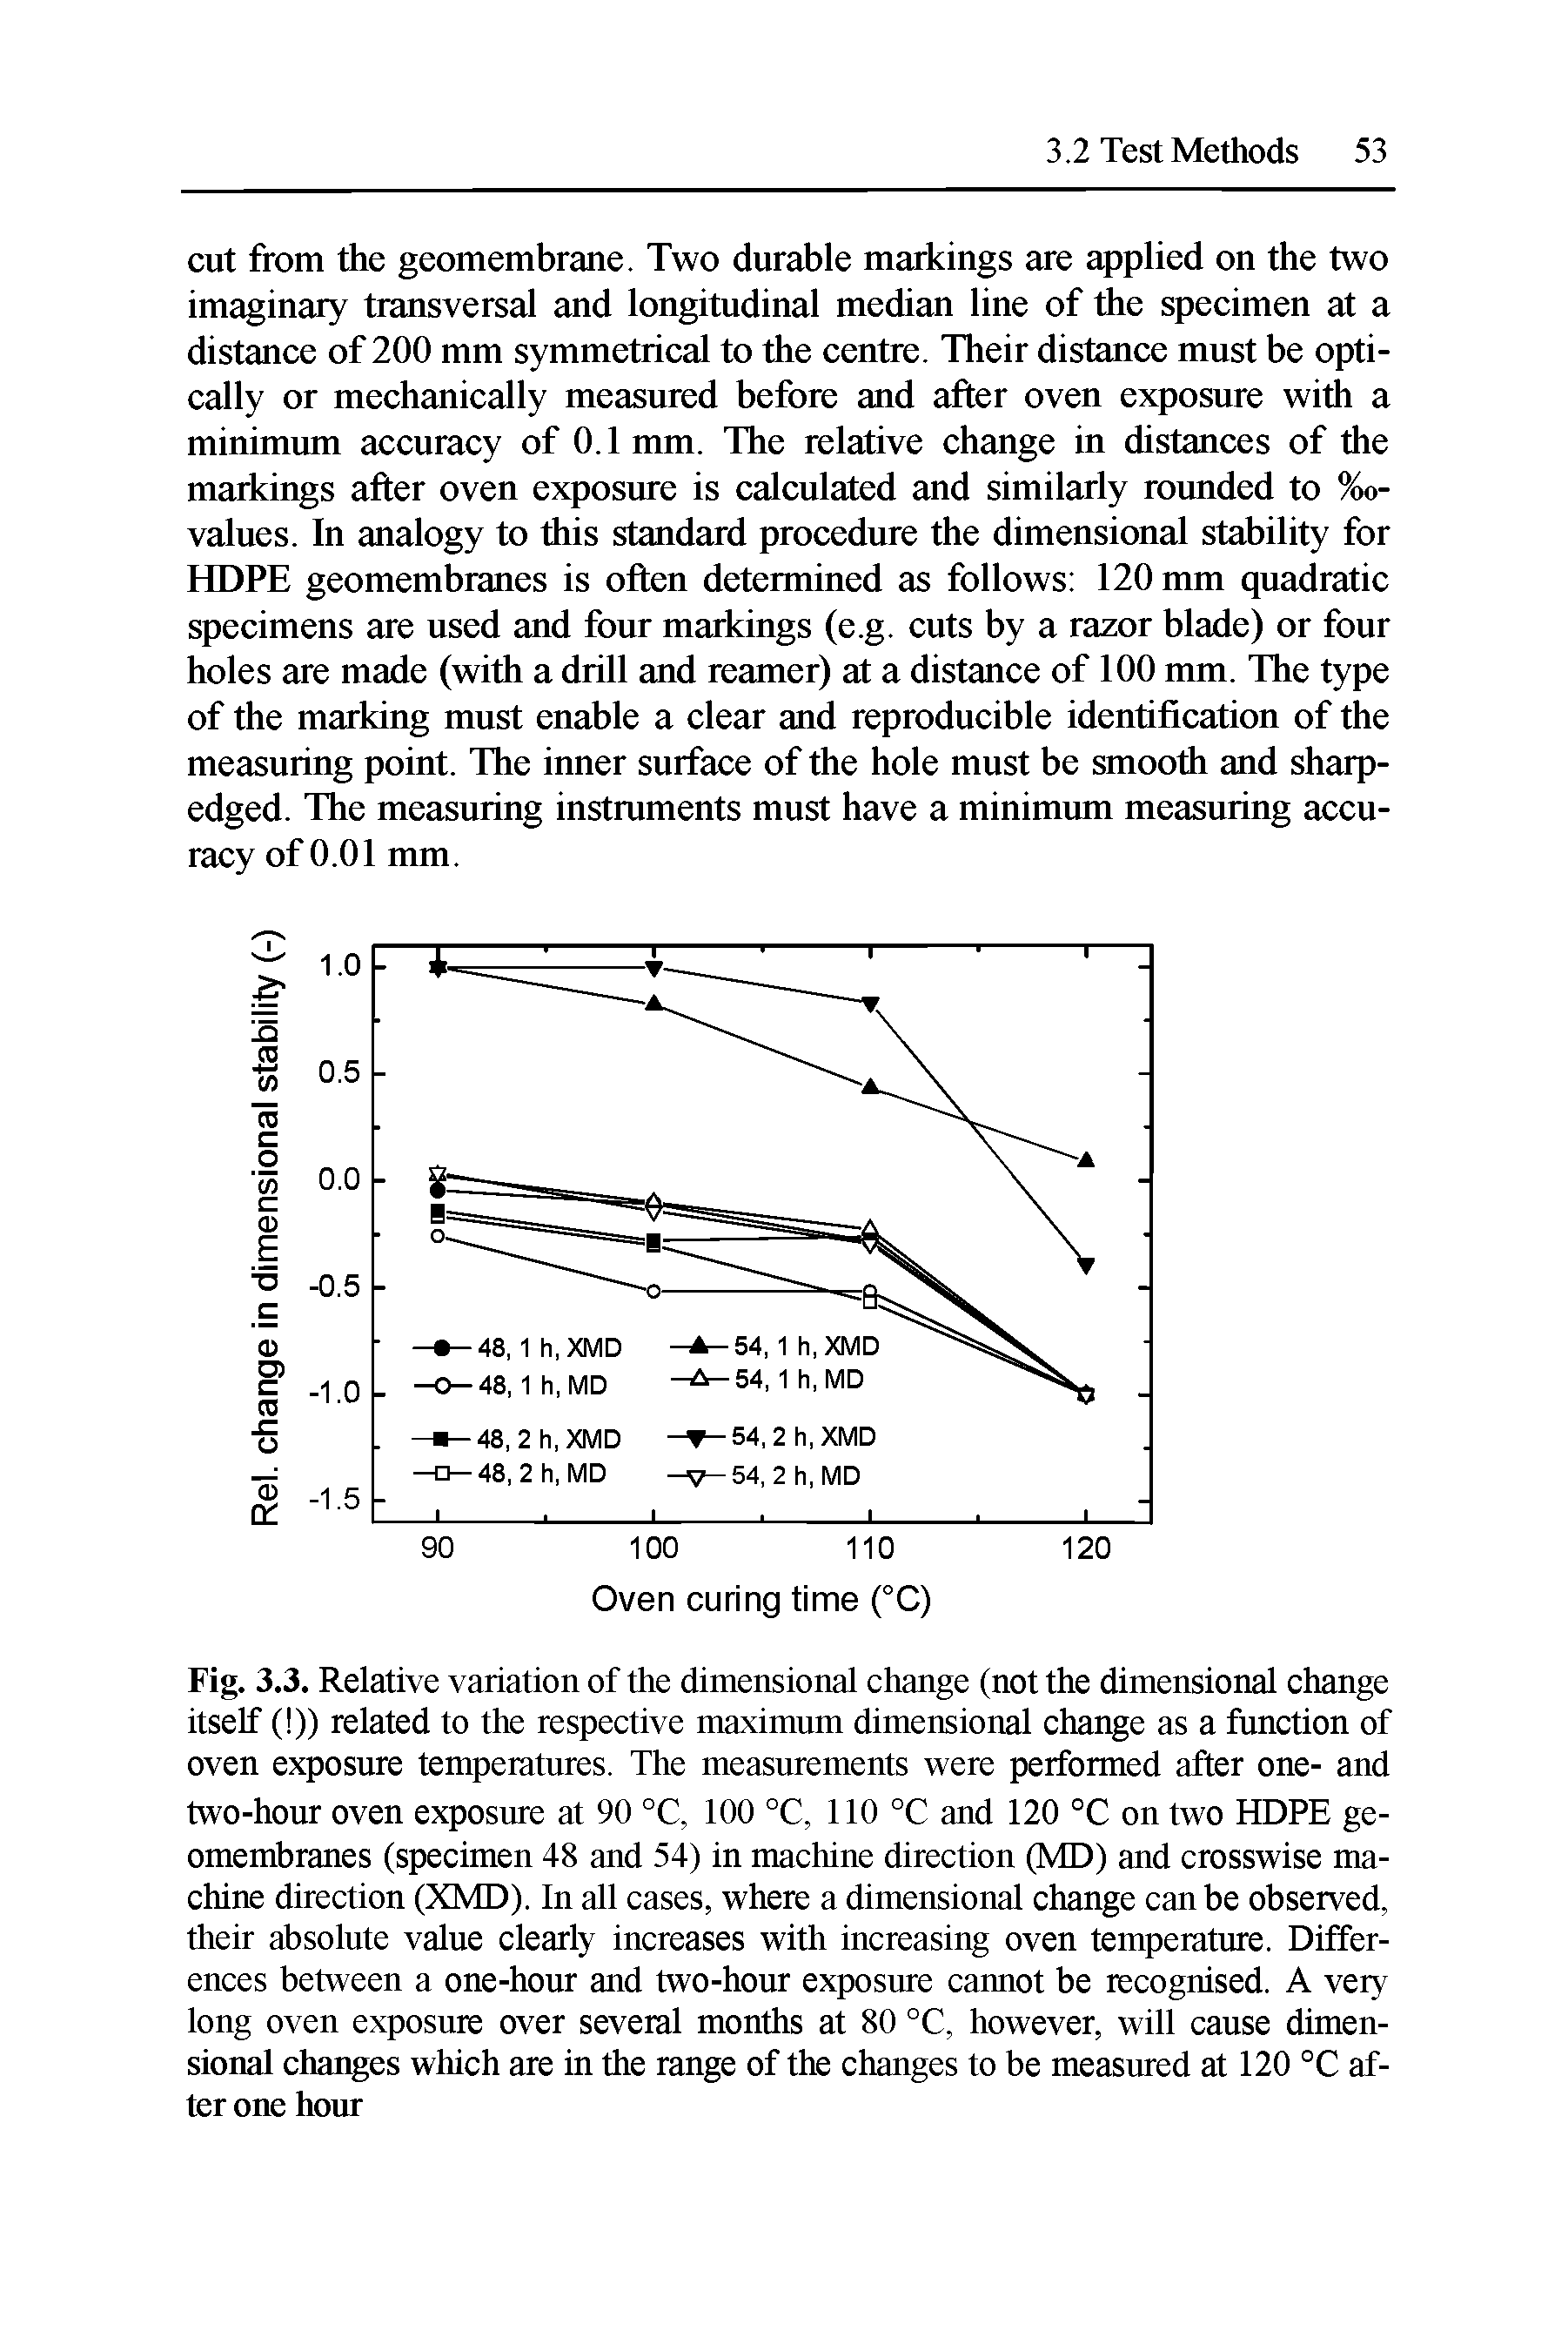 Fig. 3.3. Relative variation of the dimensional change (not the dimensional change itself ( )) related to the respective maximum dimensional change as a function of oven exposure temperatures. The measurements were performed after one- and two-hour oven exposme at 90 °C, 100 °C, 110 °C and 120 °C on two HDPE geomembranes (specimen 48 and 54) in machine direction (MD) and crosswise machine direction (XMD). In all cases, where a dimensional change can be observed, their absolute value clearly increases with increasing oven temperature. Differences between a one-hoitr and two-hoirr exposme cannot be recognised. A very long oven exposme over several months at 80 °C, however, will cause dimensional changes which are in the range of the changes to be measmed at 120 °C after one horn...